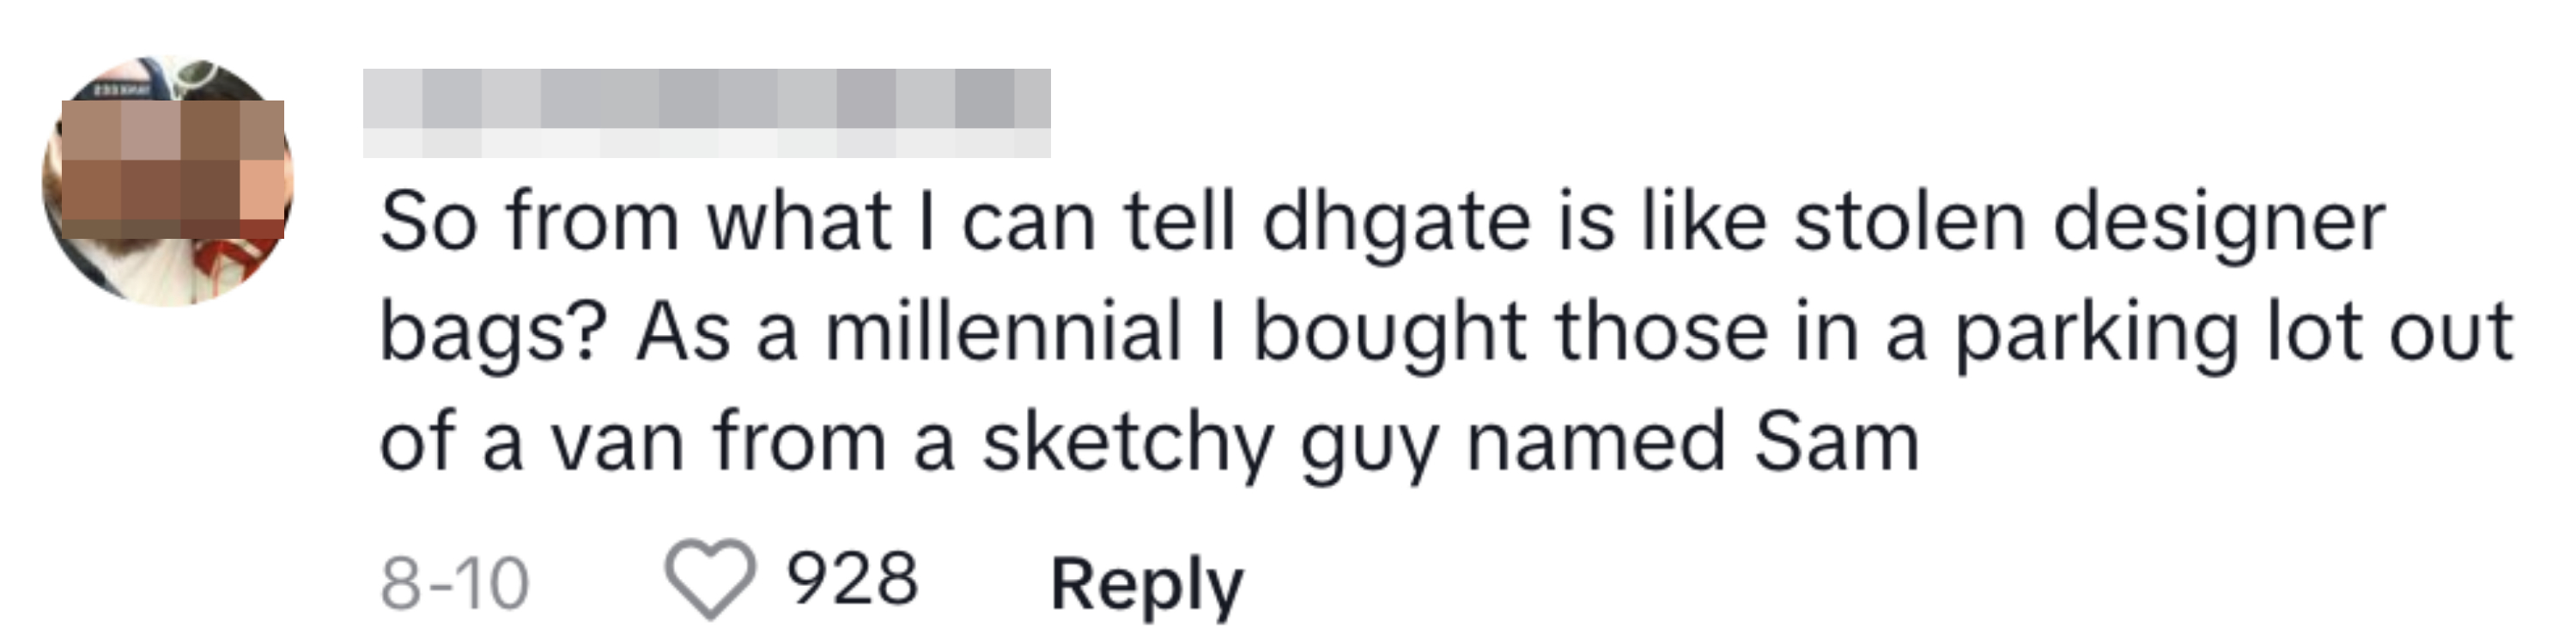 Commenter realizing that DHgate is basically like the guy who sold knockoff designer backs in his van in the 2000s